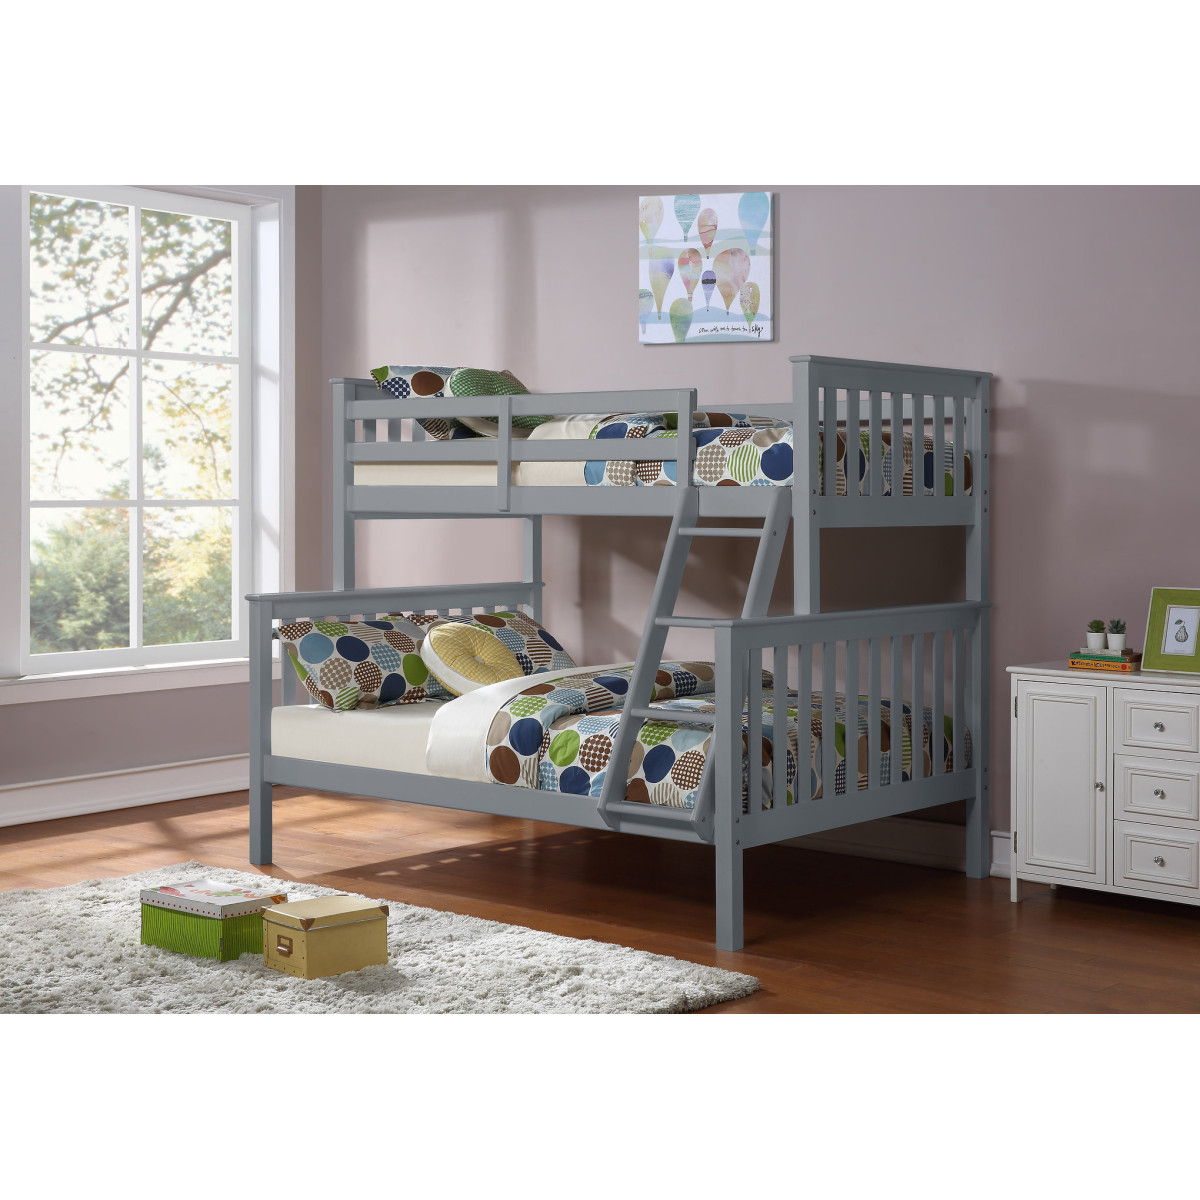 WOOD BUNK BED 102 SINGLE/DOUBLE